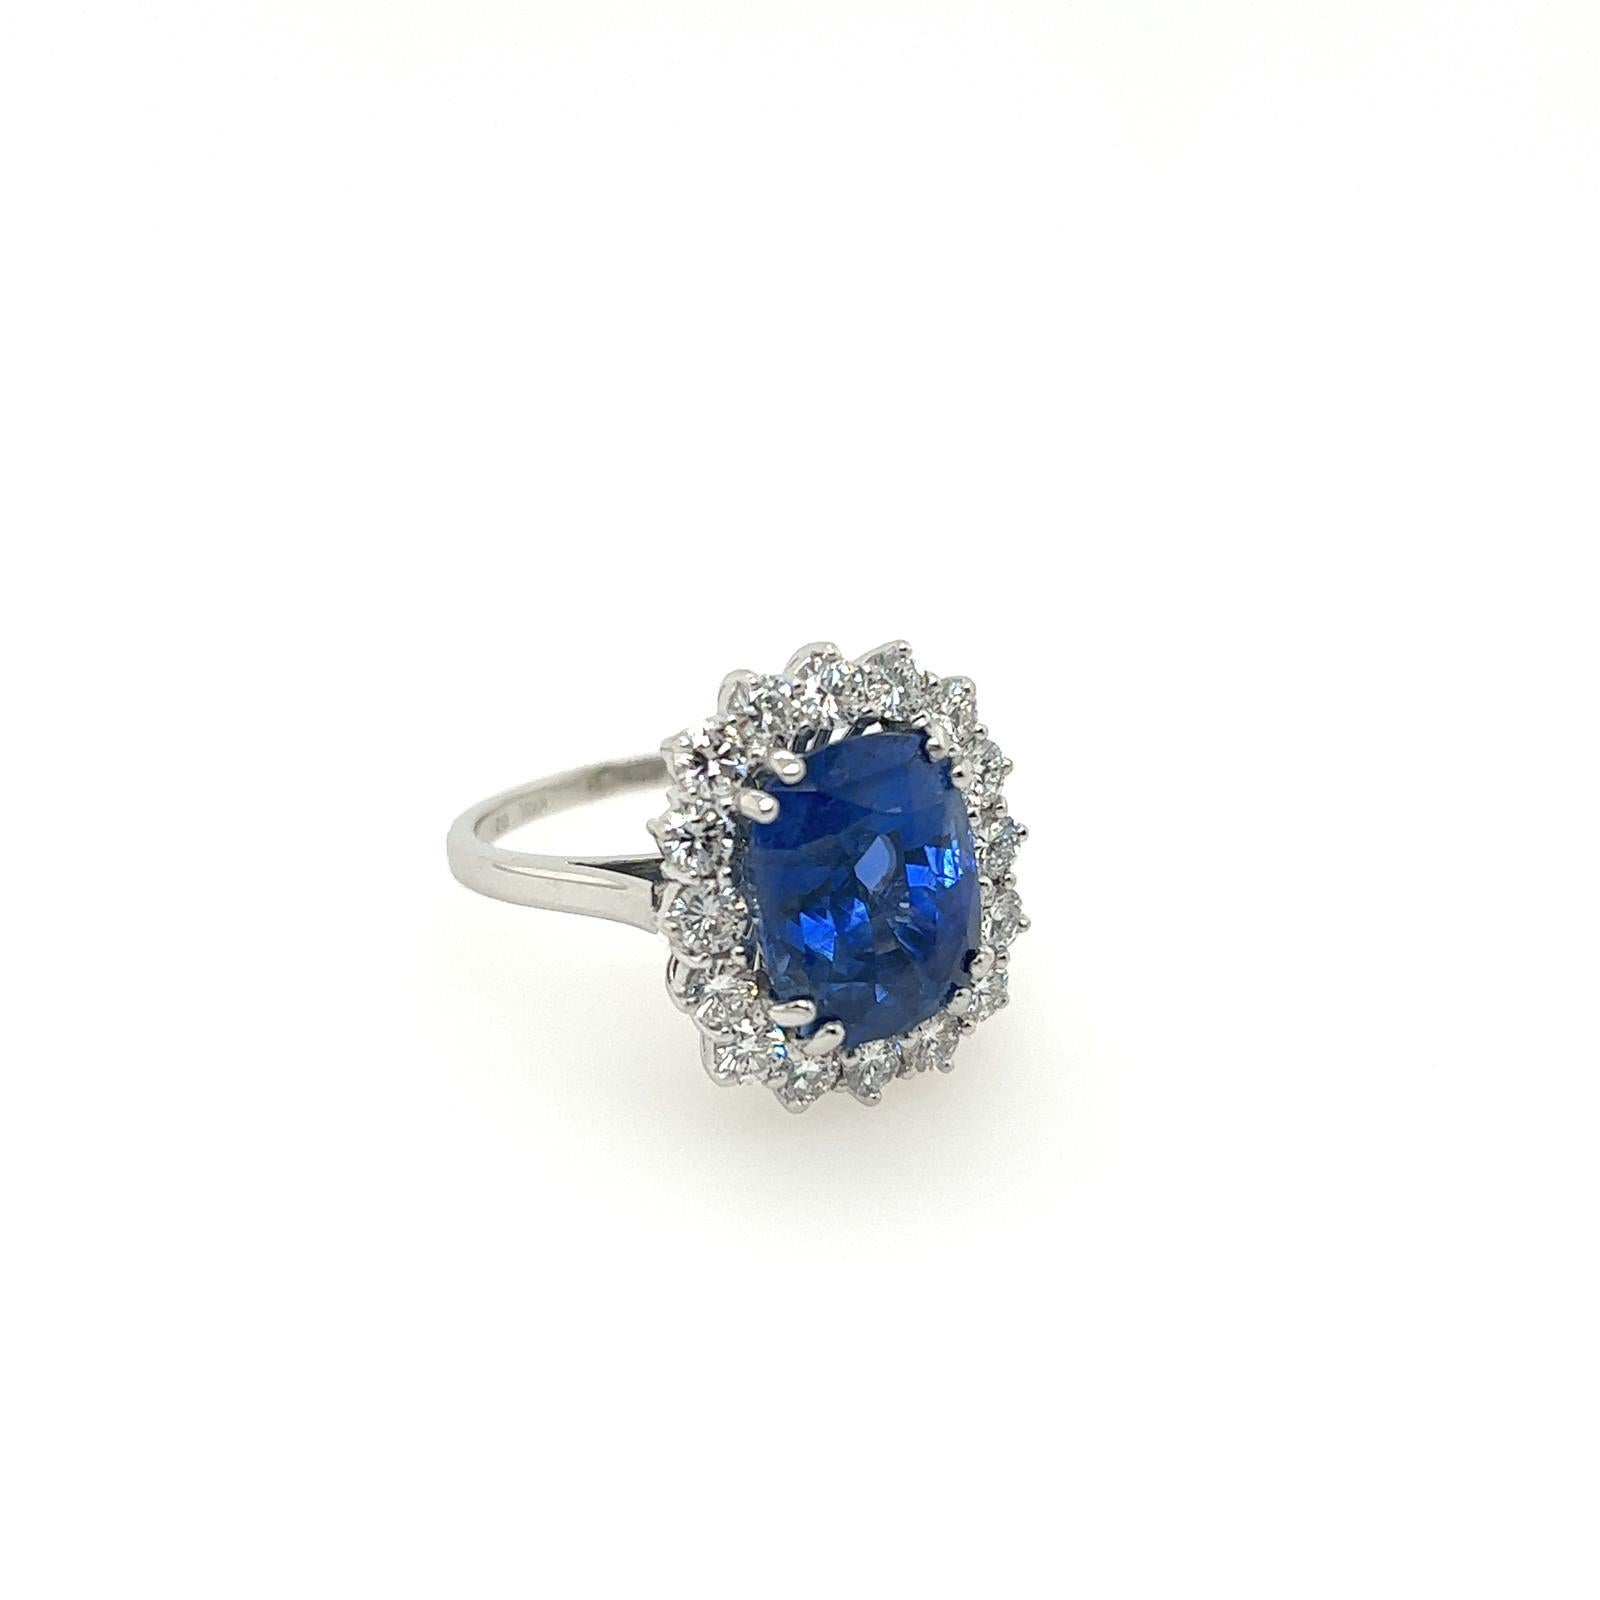 Women's GCS Certified 8.57 Carat Ceylon Sapphire and Diamond Ring in 18K White Gold For Sale